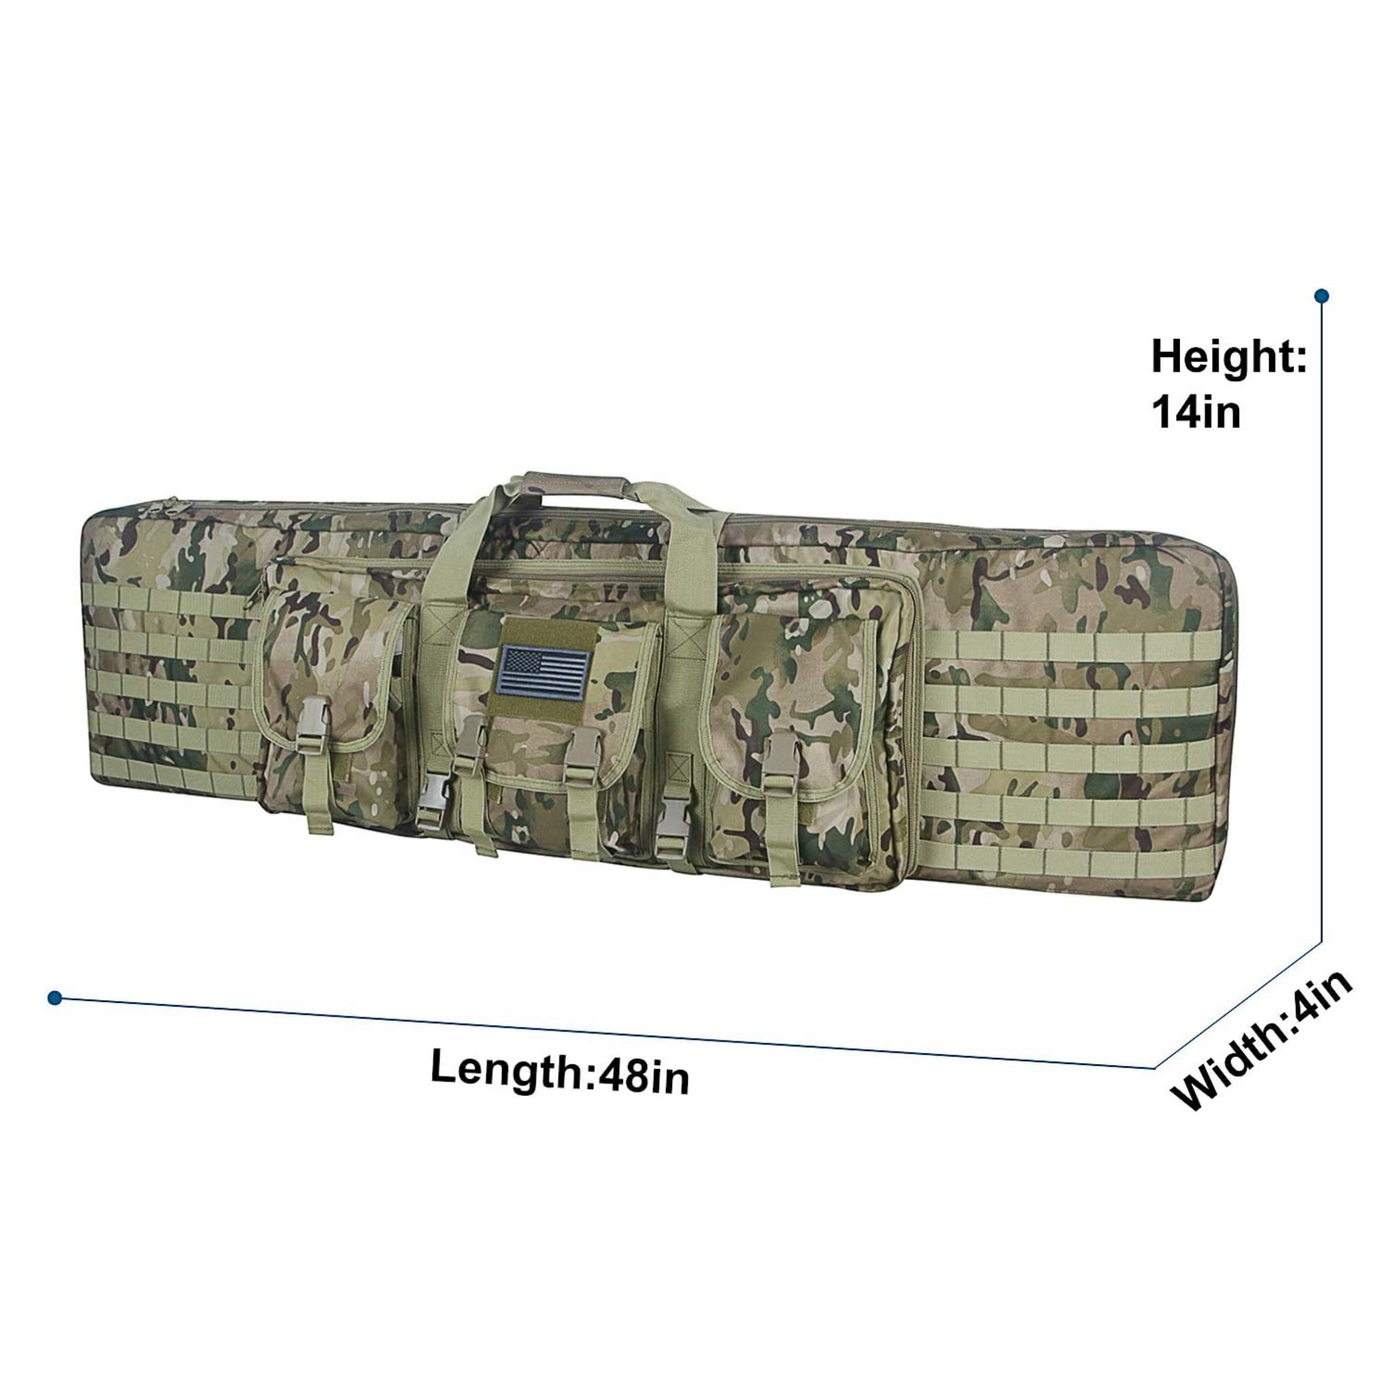 42-inch long rifle case featuring dual storage for American Classic guns